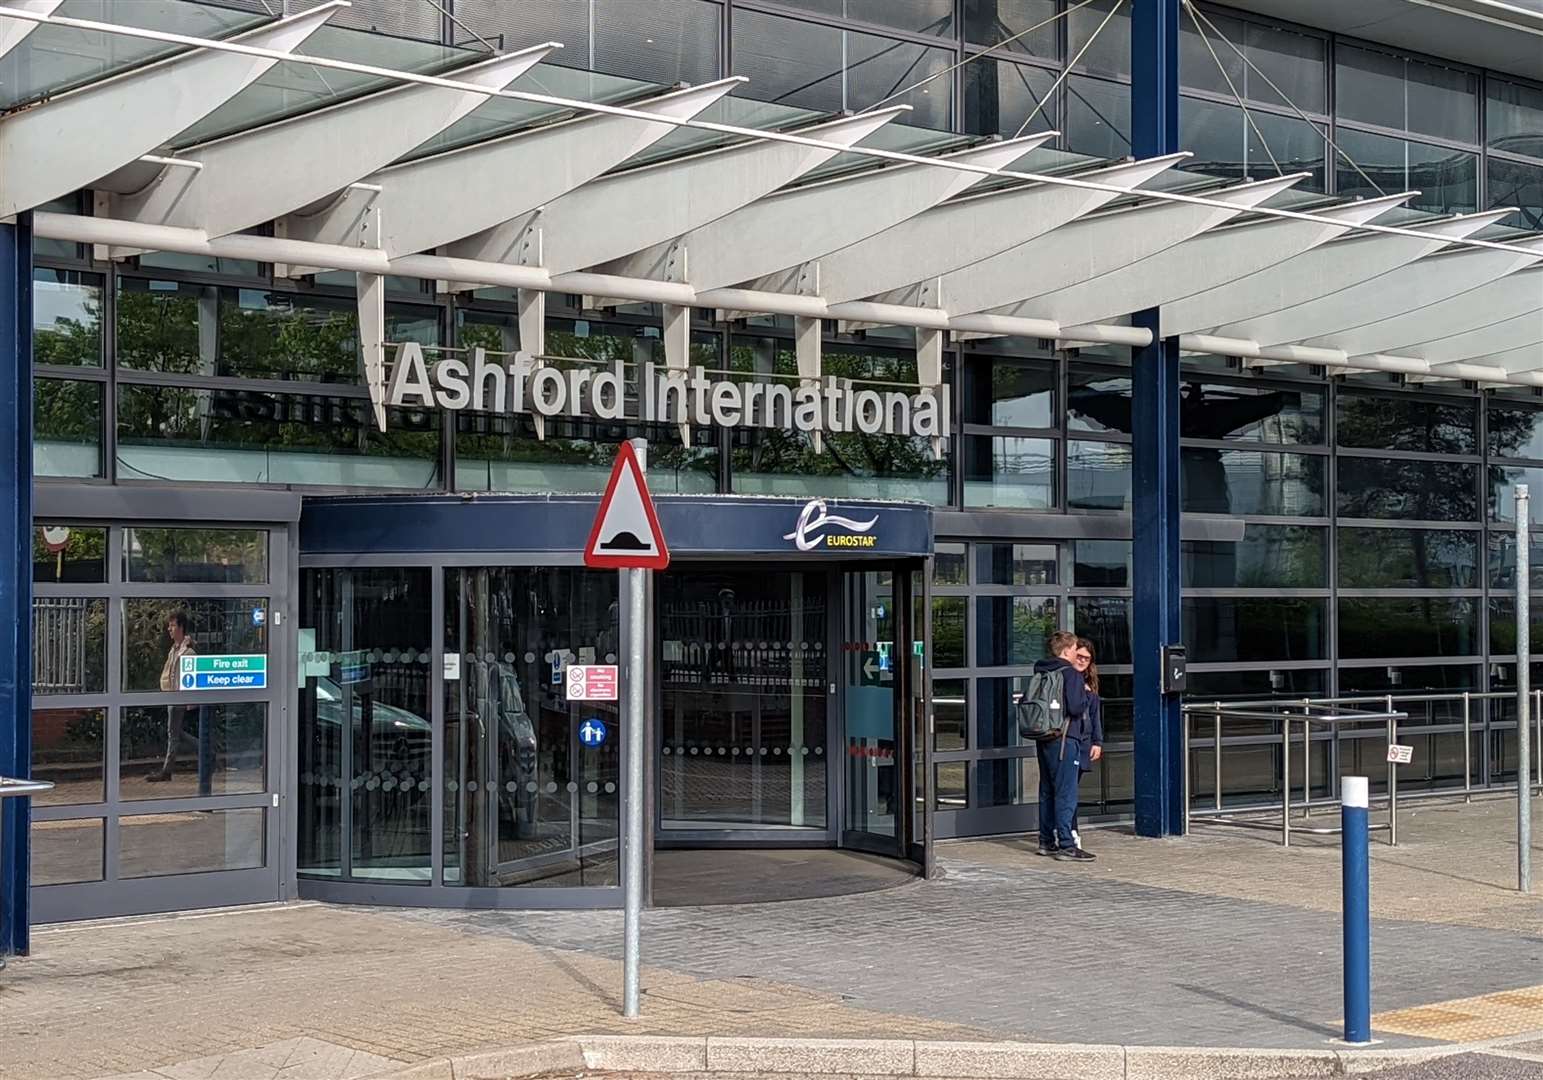 The entrance to Ashford International on Avenue Jacques Faucheux